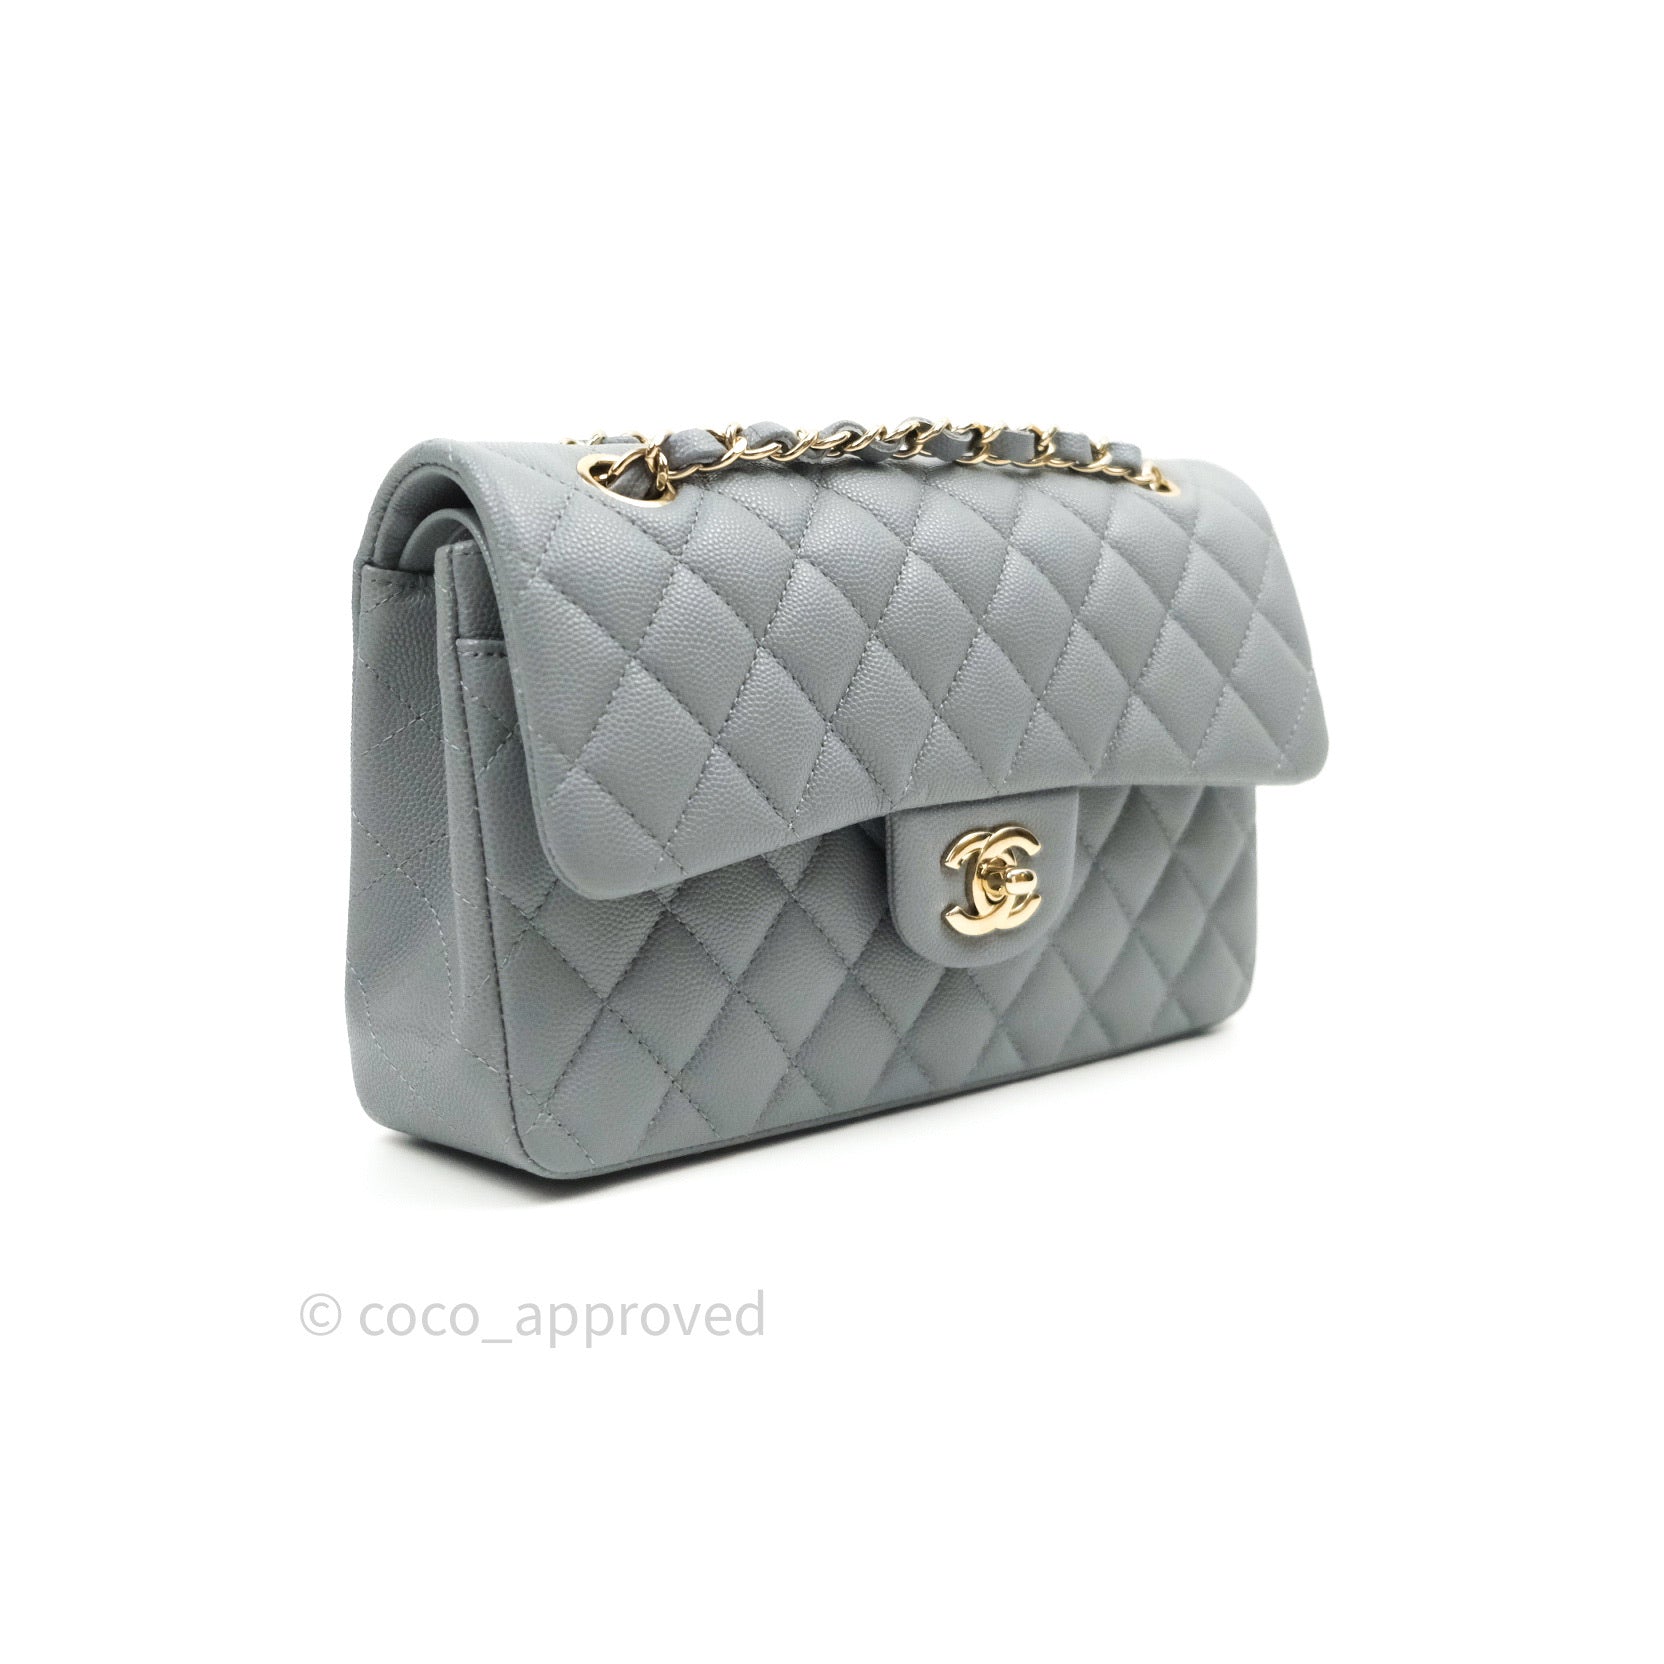 Chanel 22K Small Flap Bag with Top Handle trắng da caviar GHW best quality